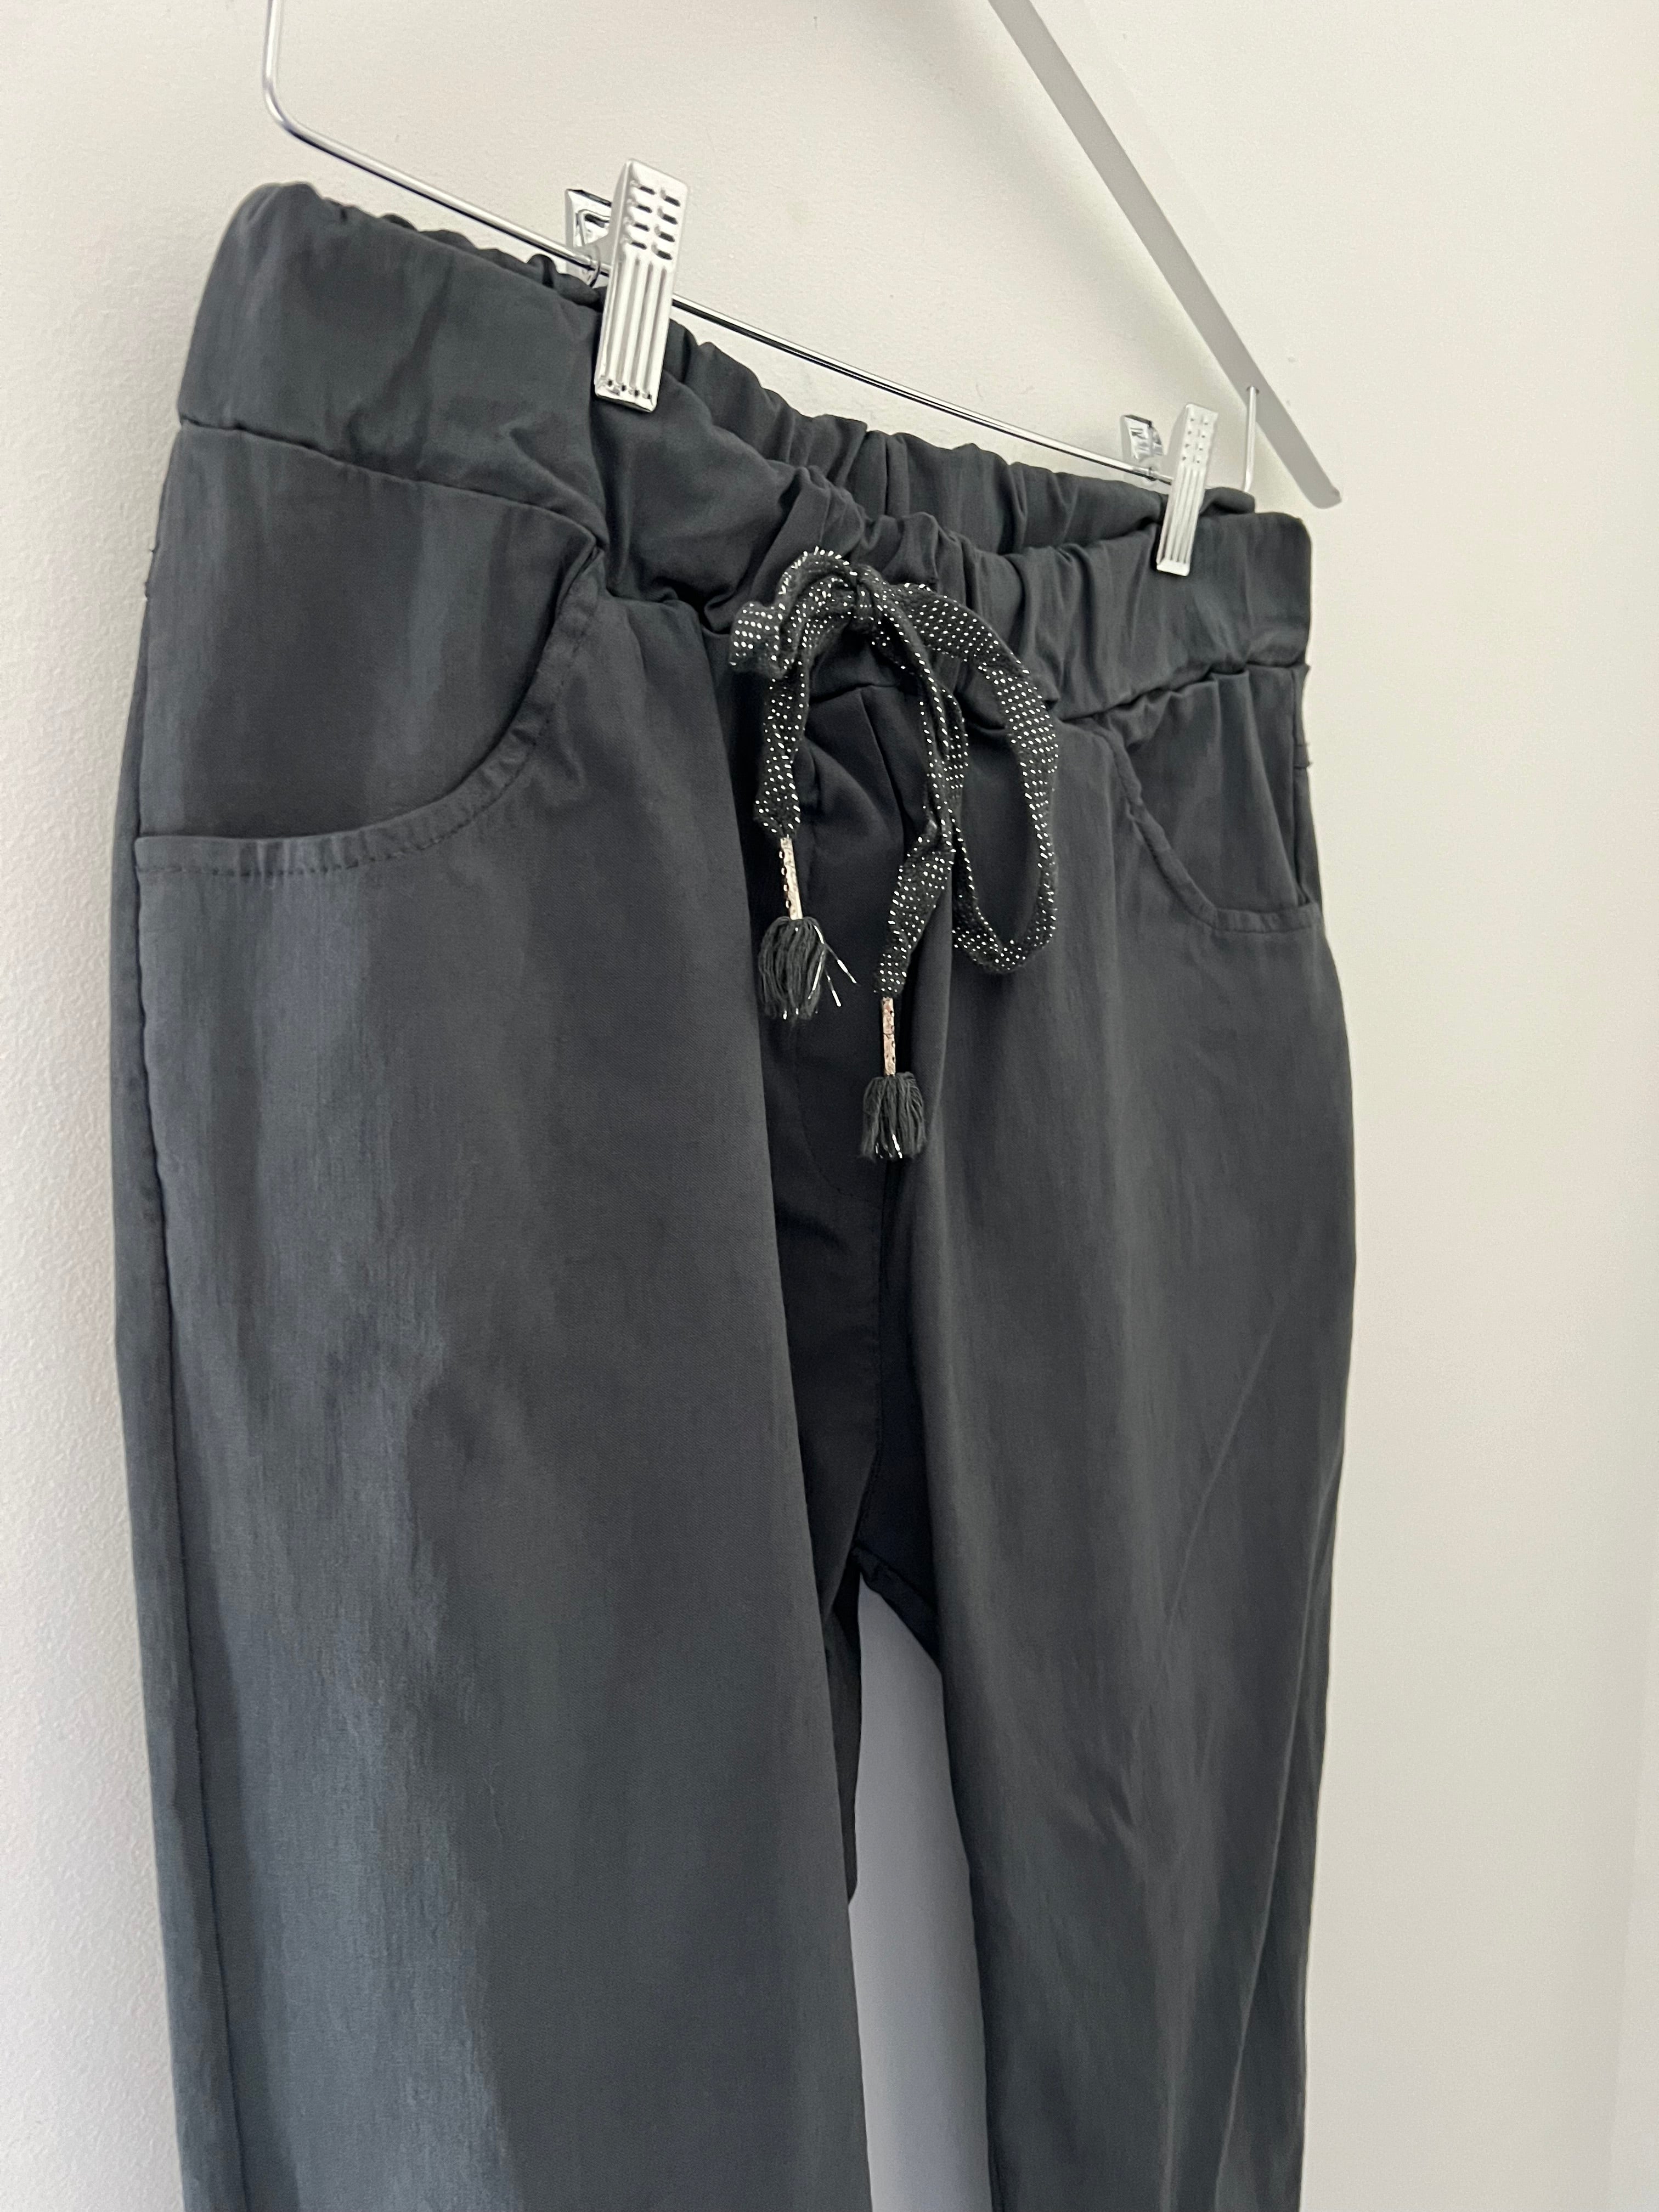 Super Stretch Four Pocket Joggers in Charcoal